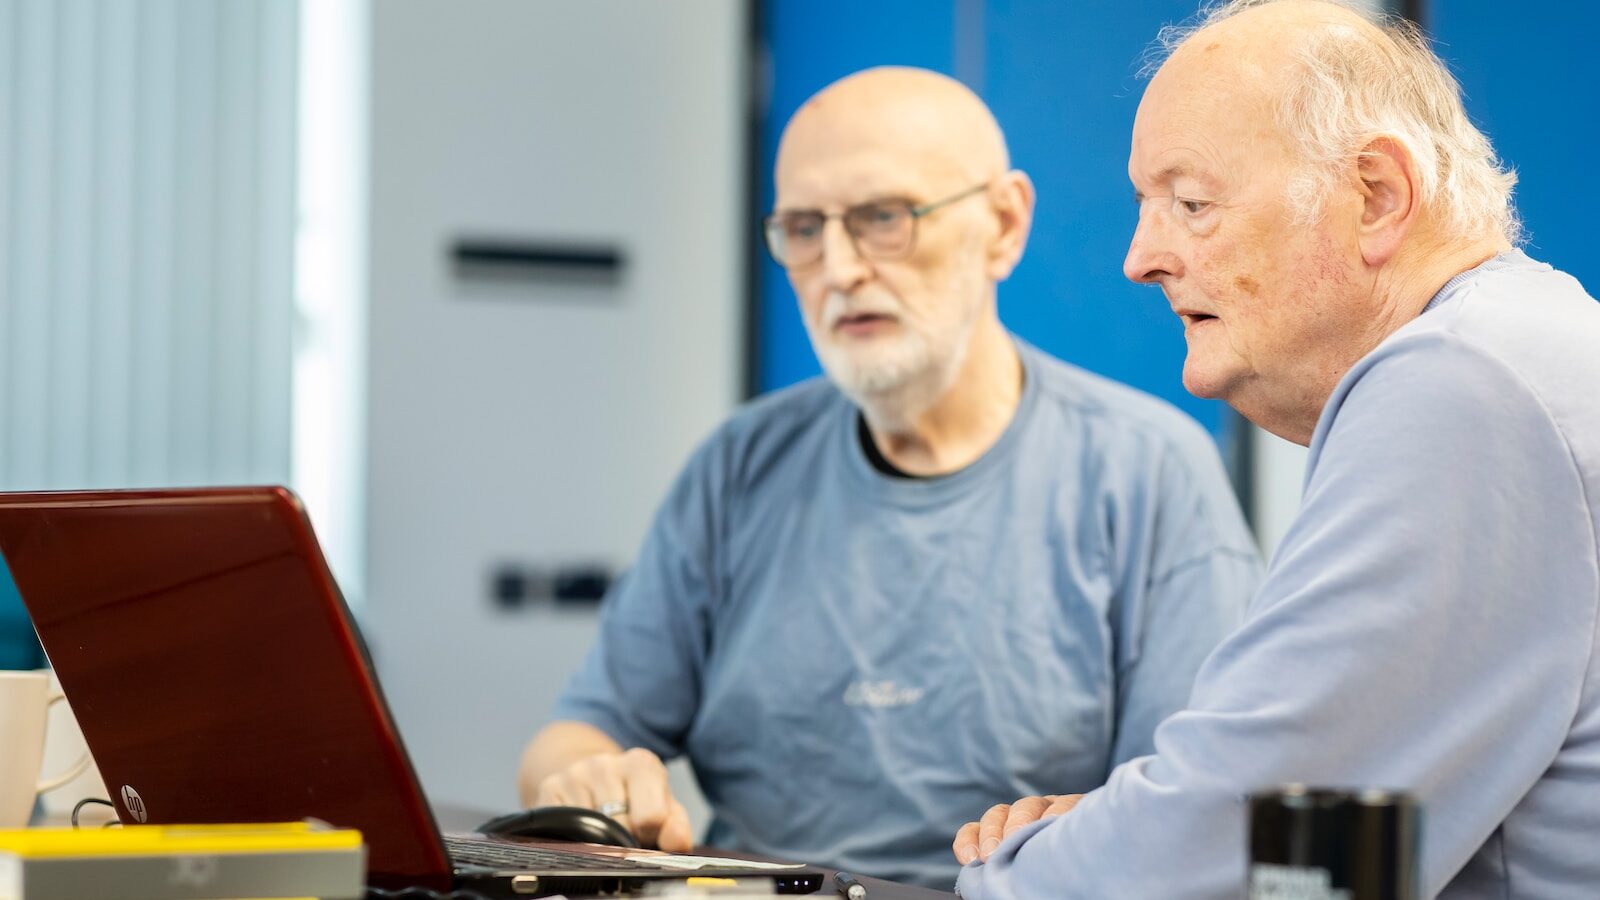 two men sitting at a table looking at a laptop